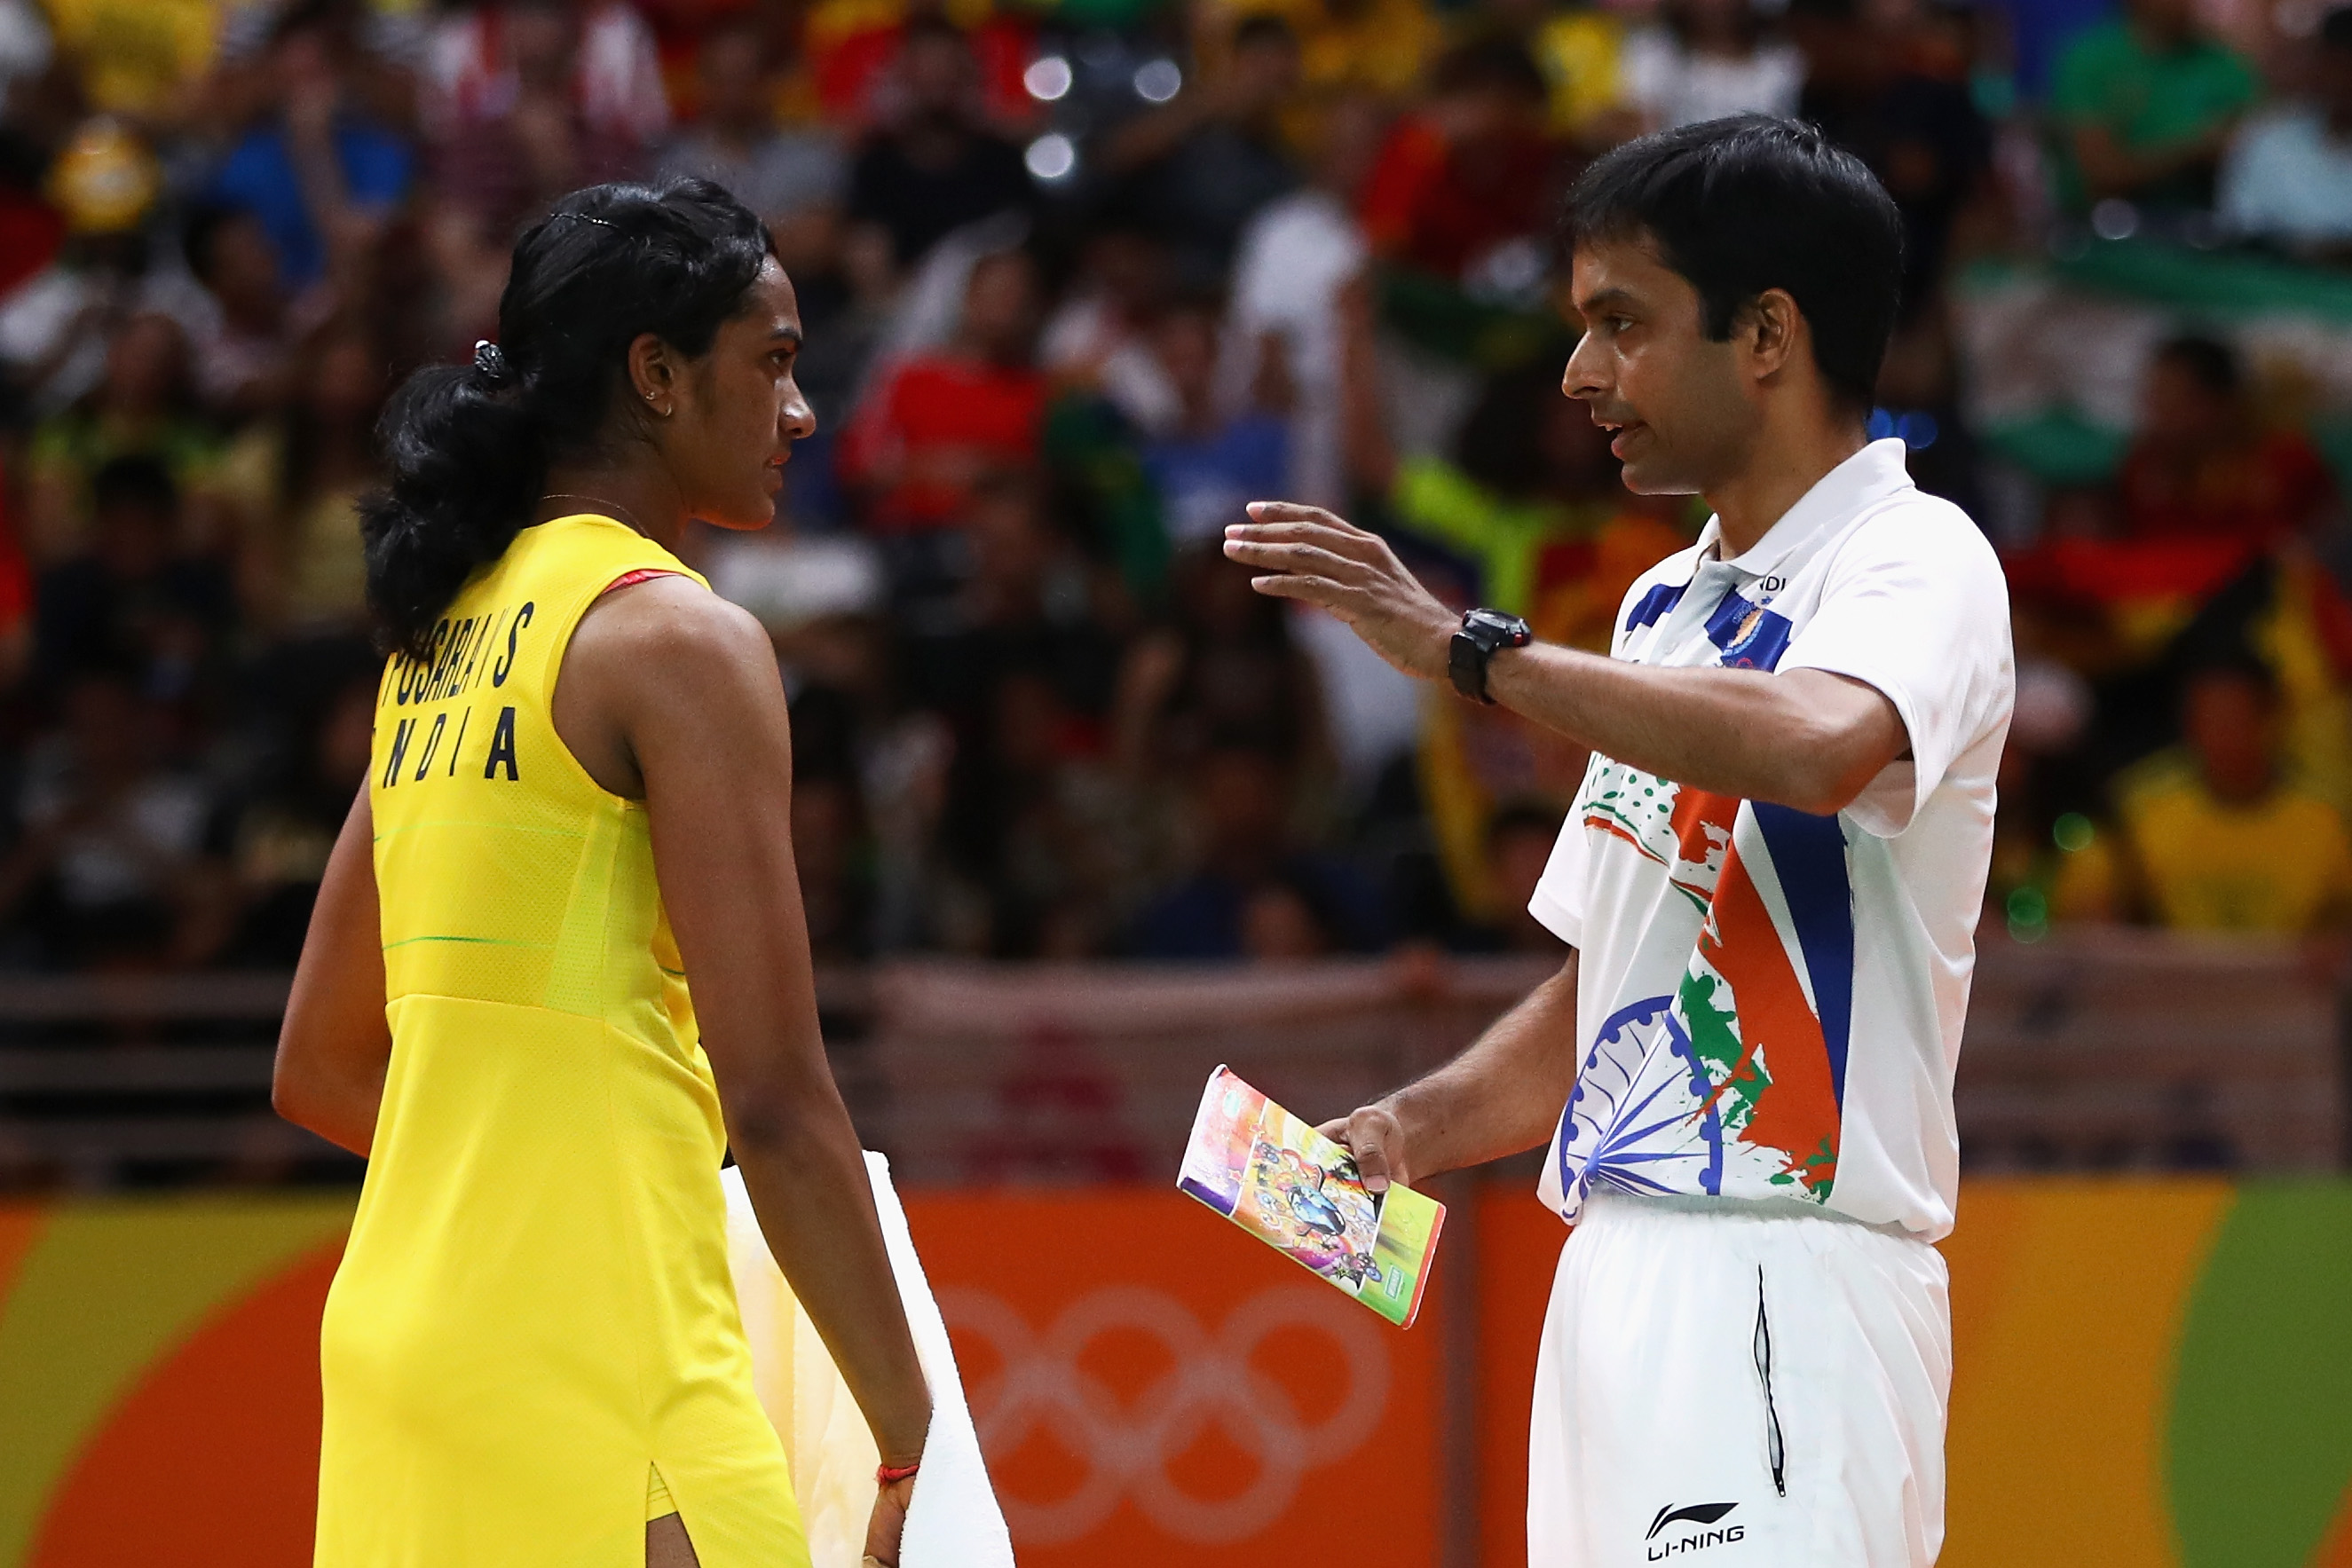 Pullela Gopichand : India is fortunate that we have players like Sindhu and Saina